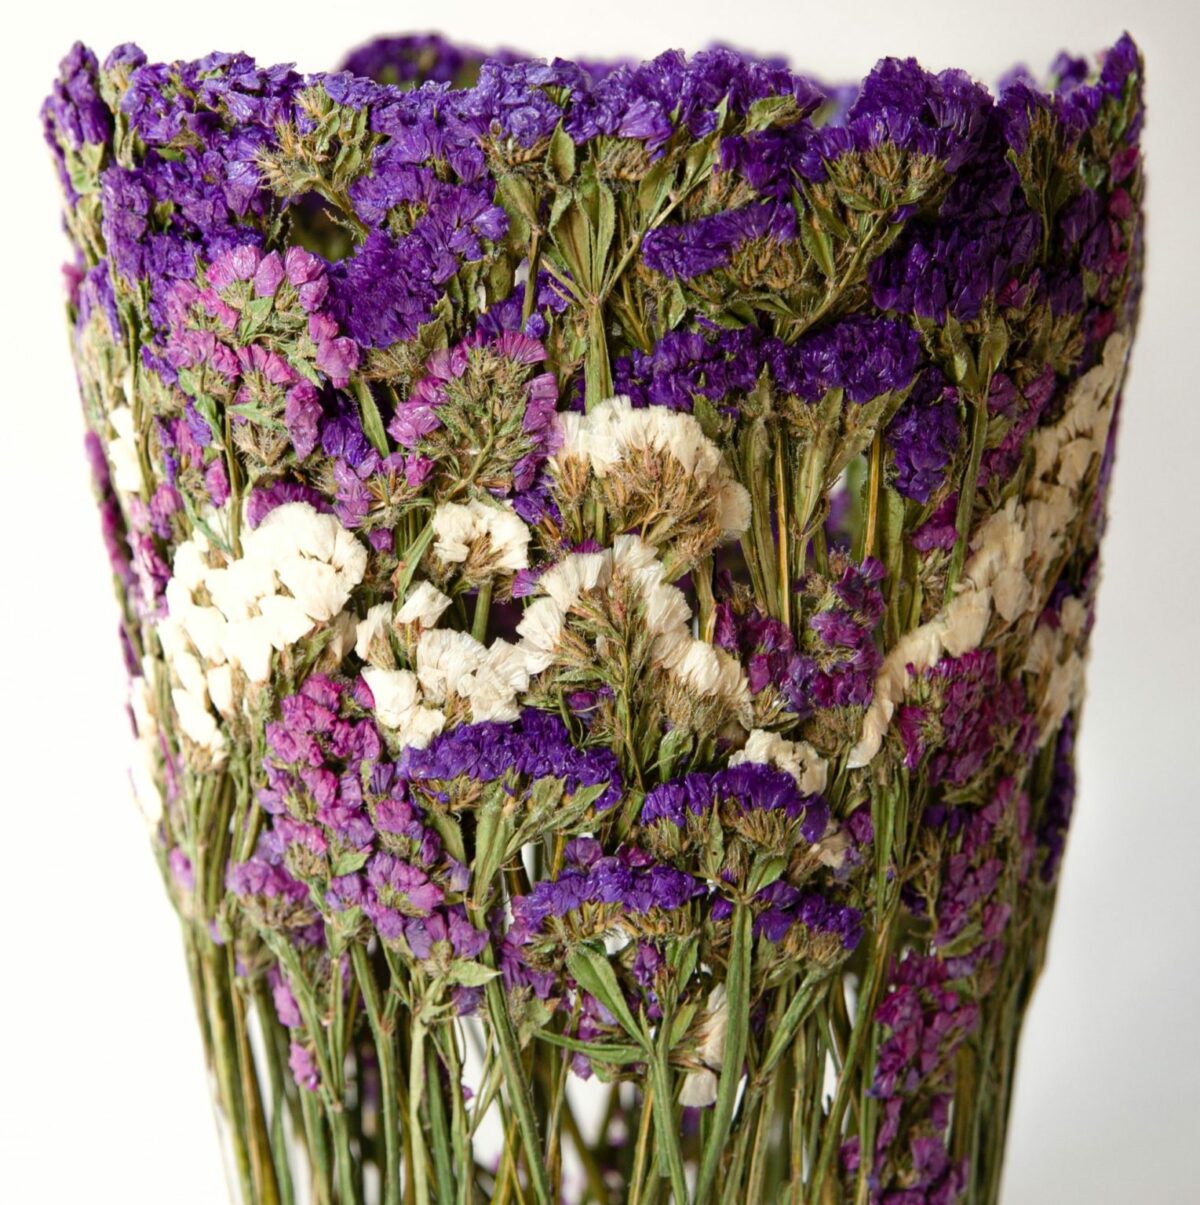 Bouquet Delicate Sculptural Vessels Made Of Dried And Pressed Flowers By Shannon Clegg (8)